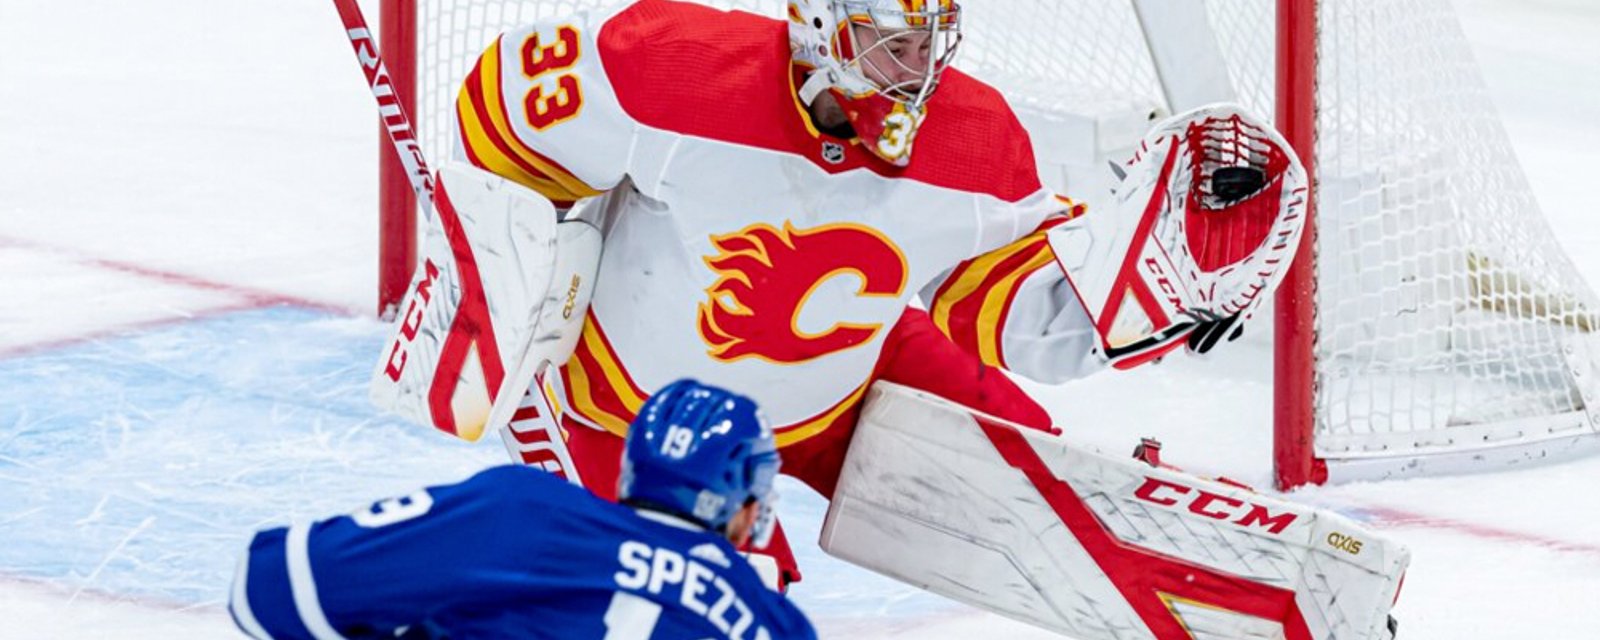 Report: Rittich to make his first start for Leafs tonight... against the Flames